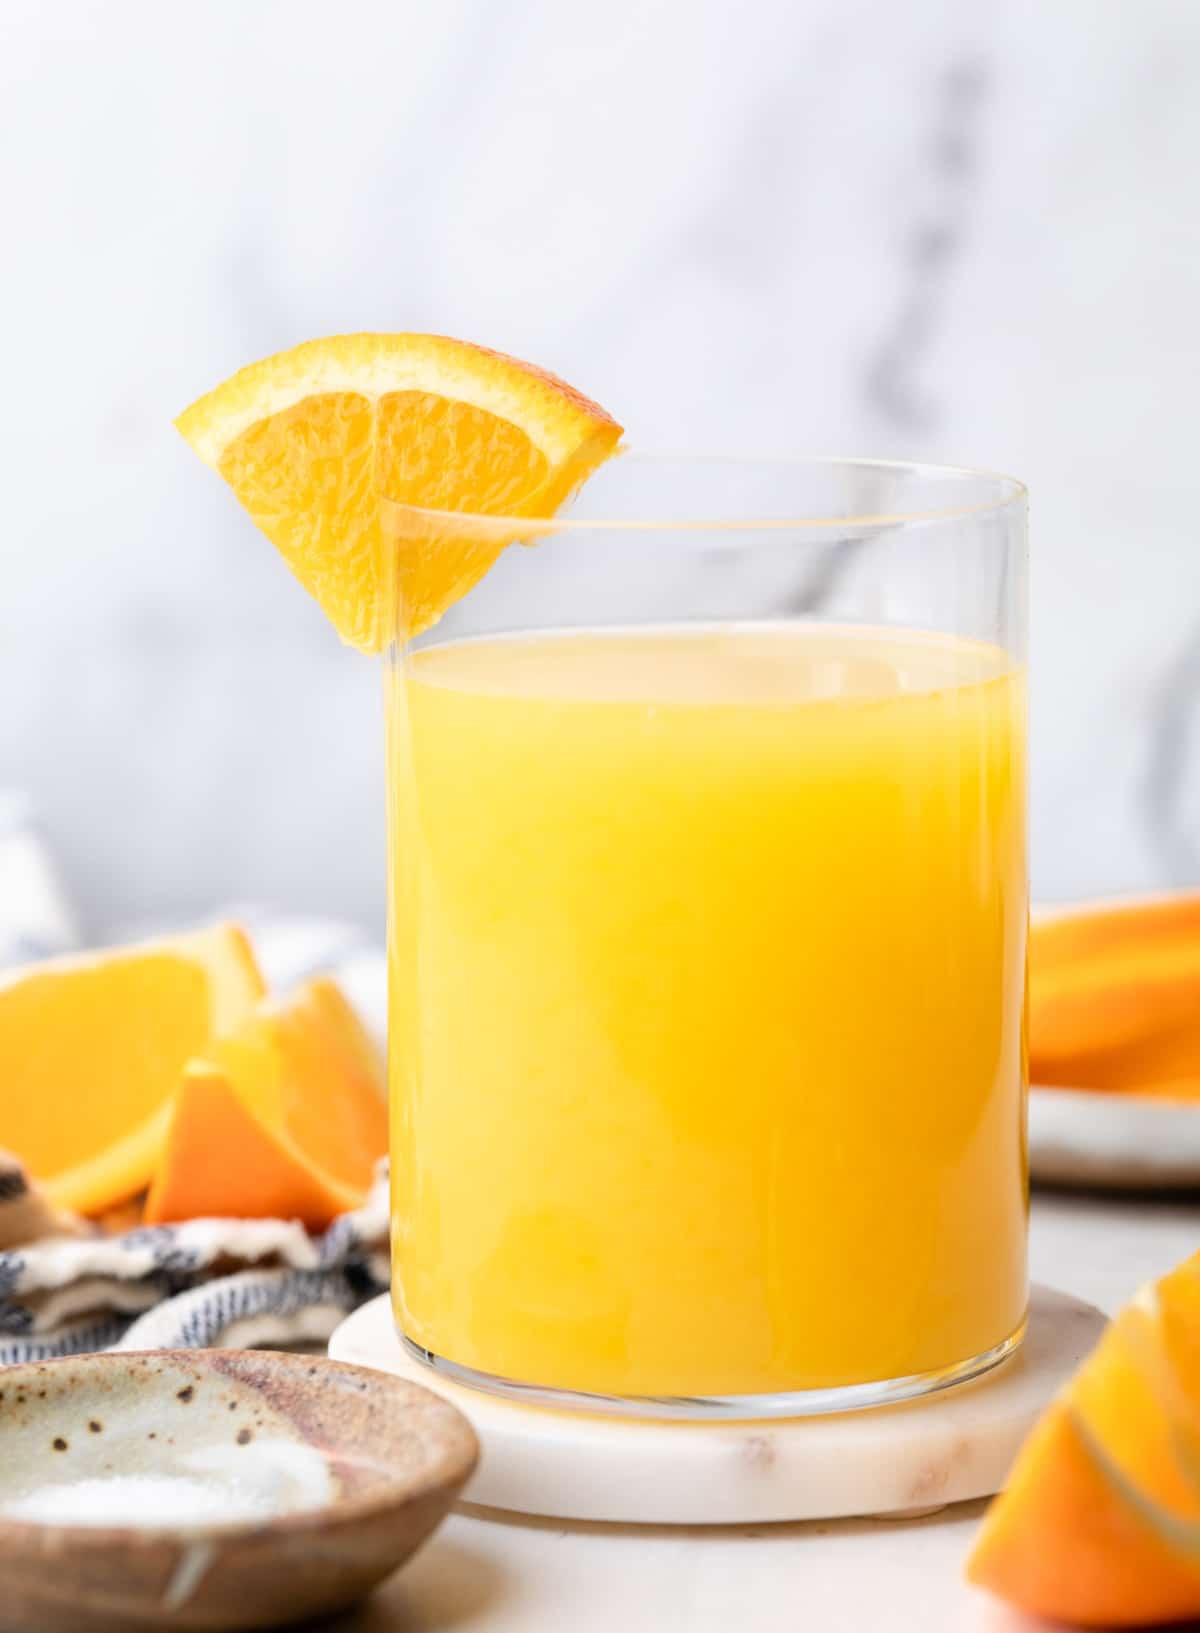 A small glass of an adrenal cocktail and a slice of orange on the glass.